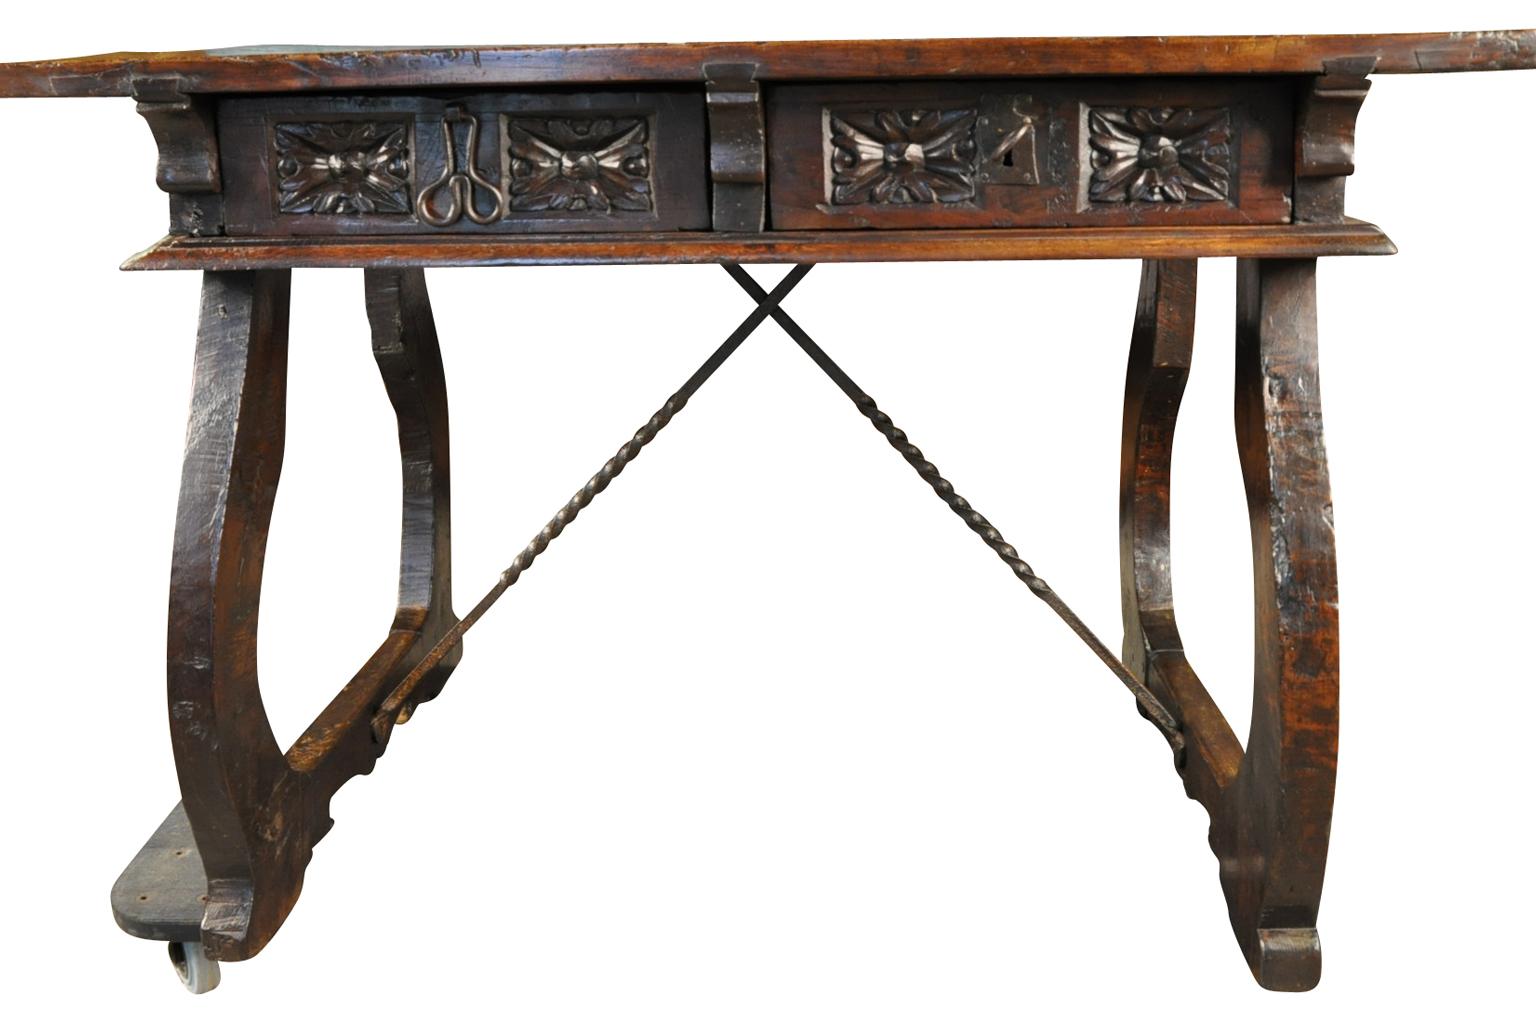 A stunning 17th century writing table from the Navarre region of Spain. Wonderfully constructed from walnut with an outstanding solid board top, classical lyre shaped legs, hand forged iron stretchers, beautifully carved drawer fascias and apron